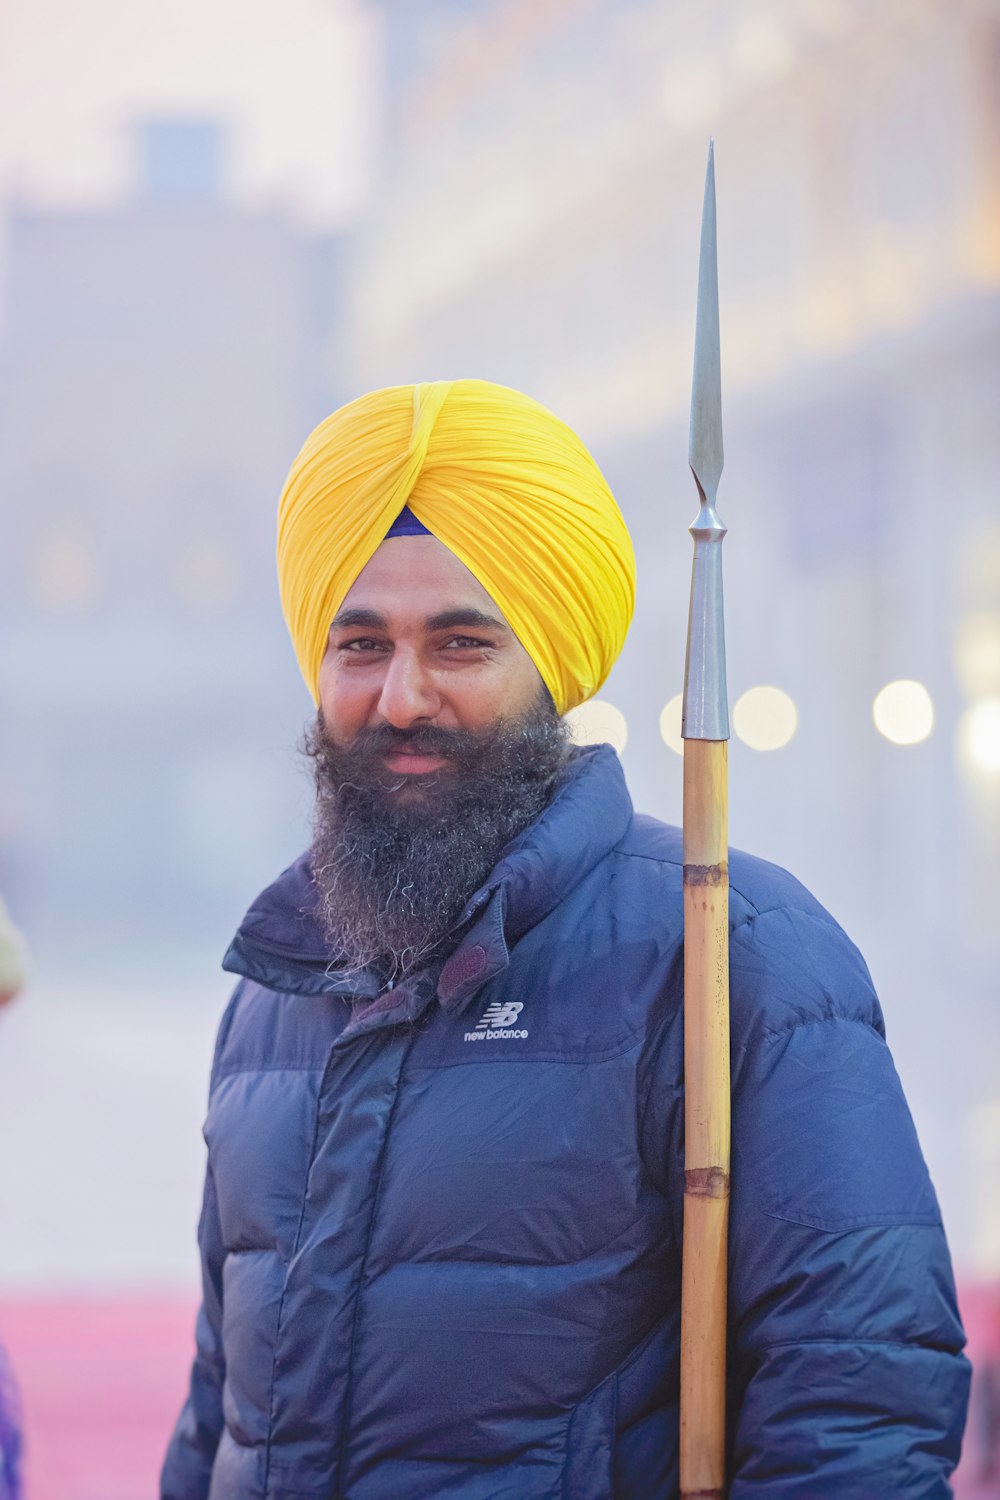 a man with a yellow turban holding a stick